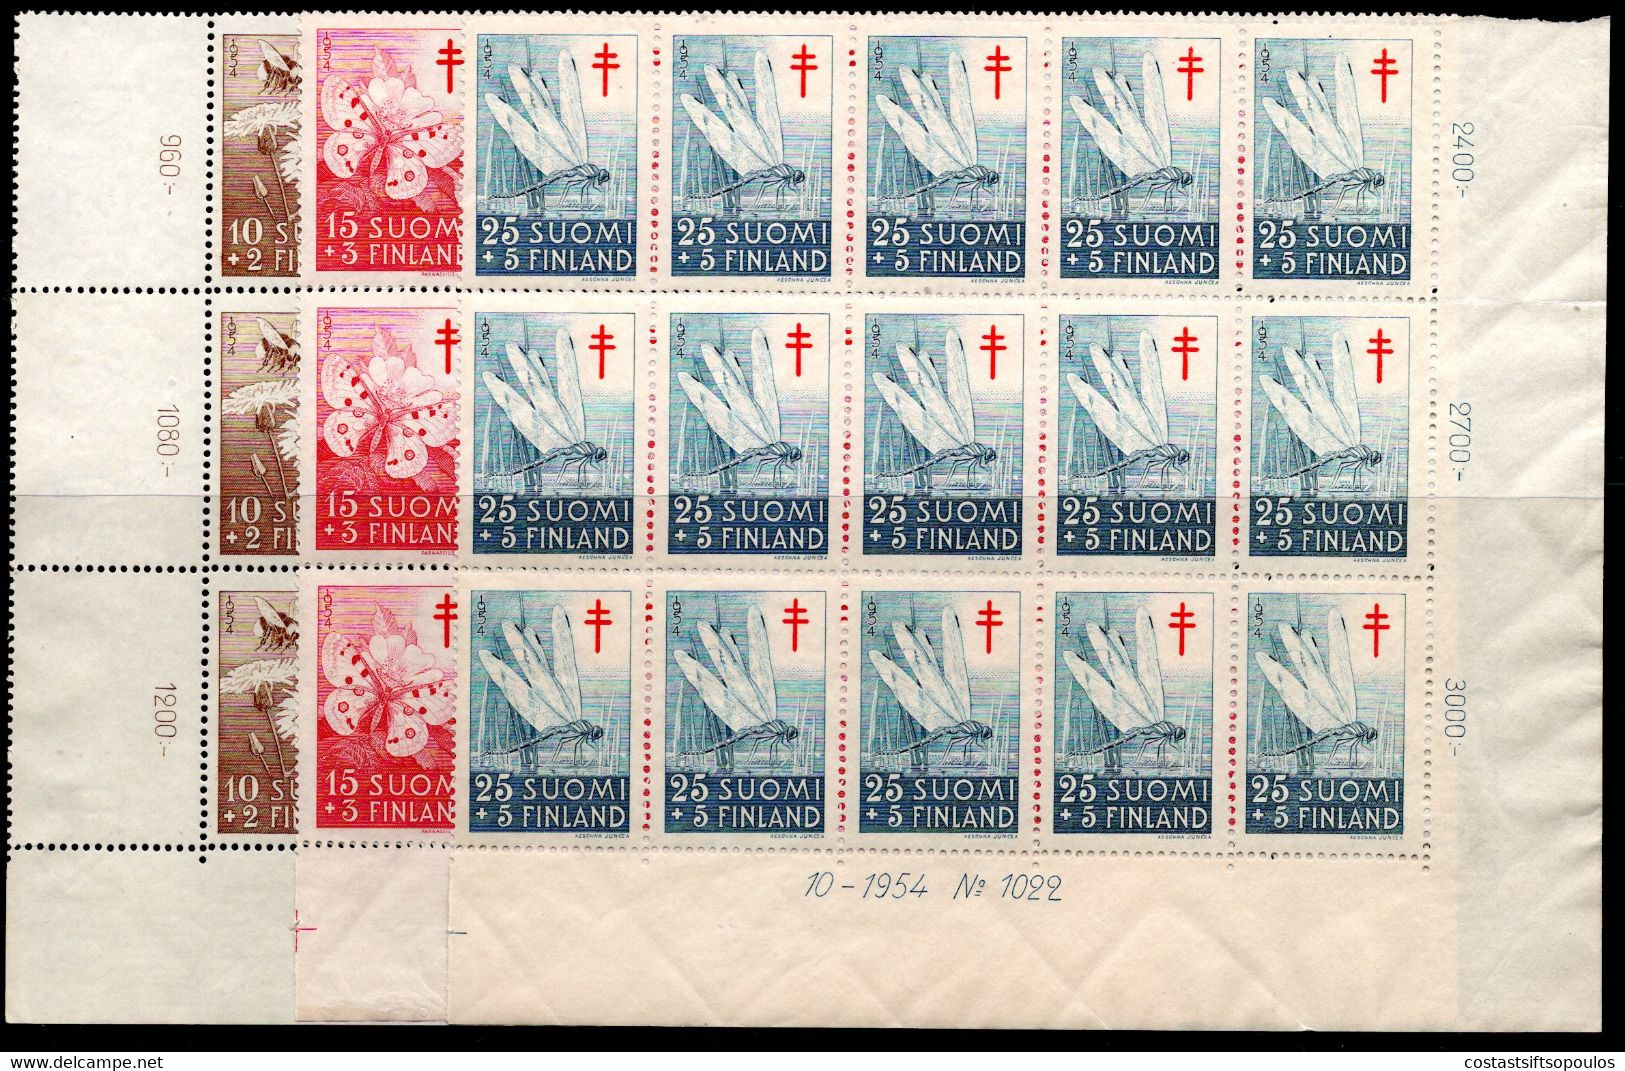 843.FINLAND.1954 INSECTS,MNH IMPRINT BLOCKS OF 15,SC. B126-B128 - Feuilles Complètes Et Multiples